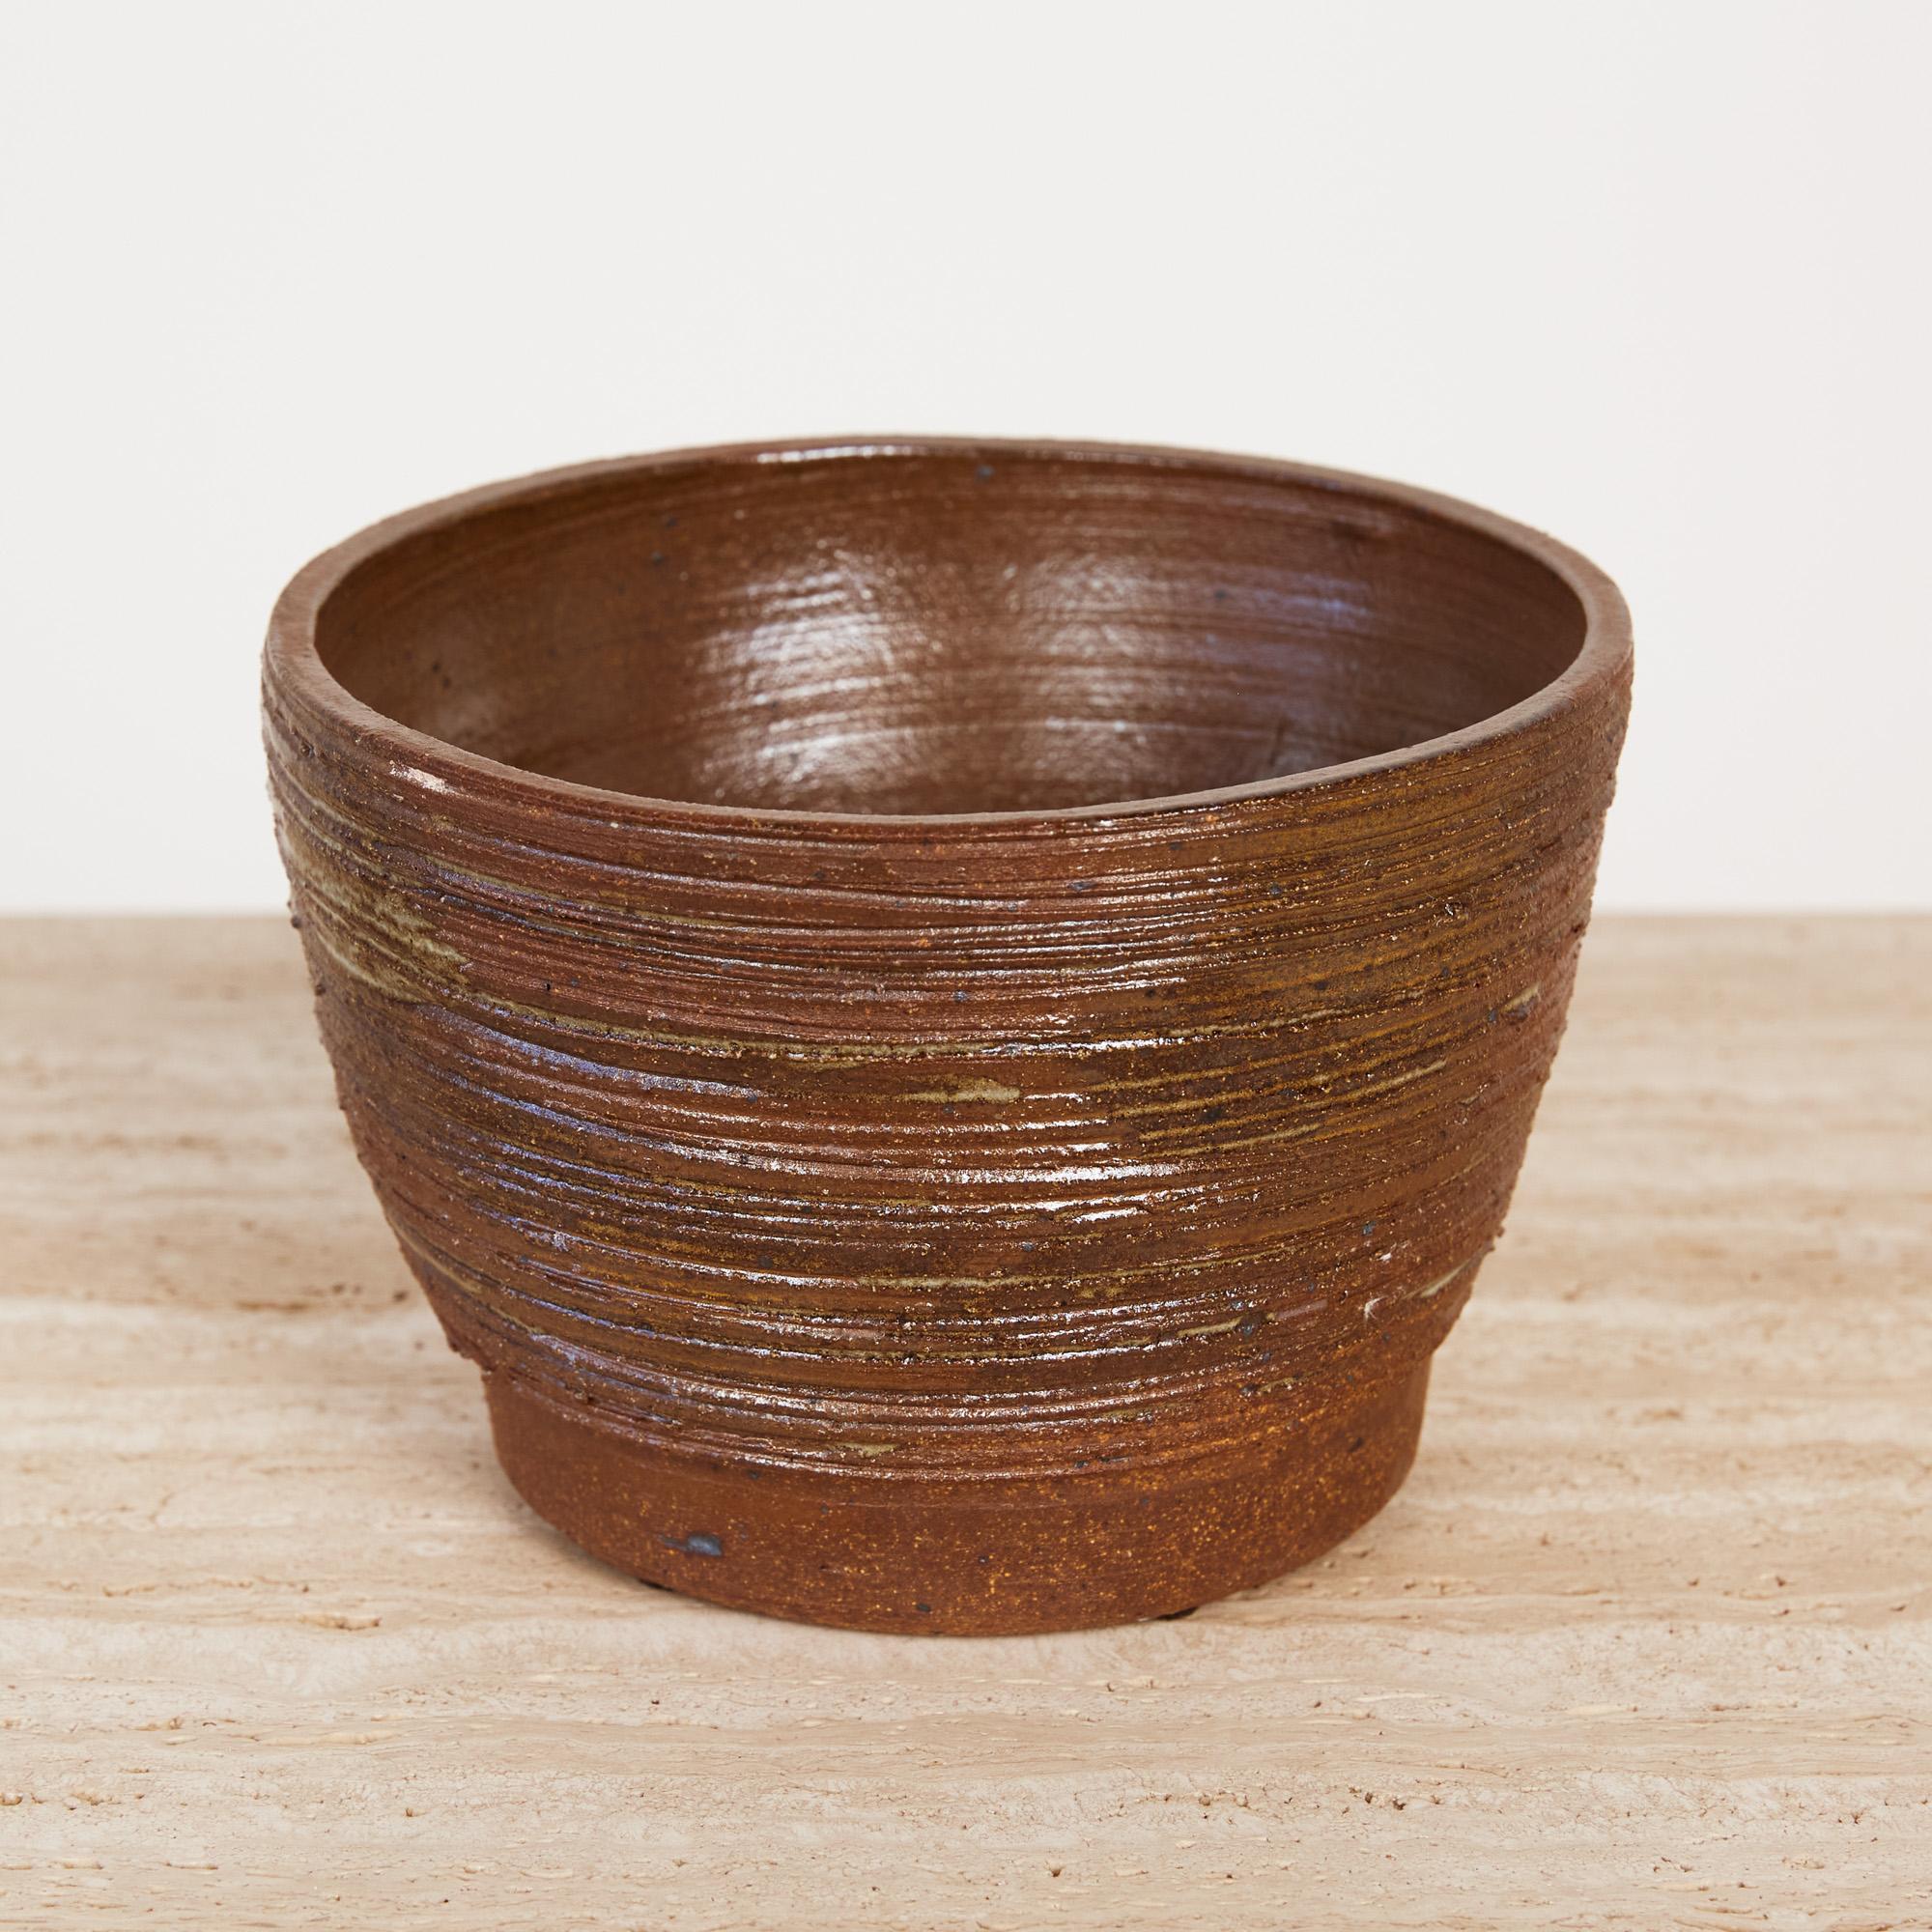 American Ceramic Vessel with Incised Striated Pattern